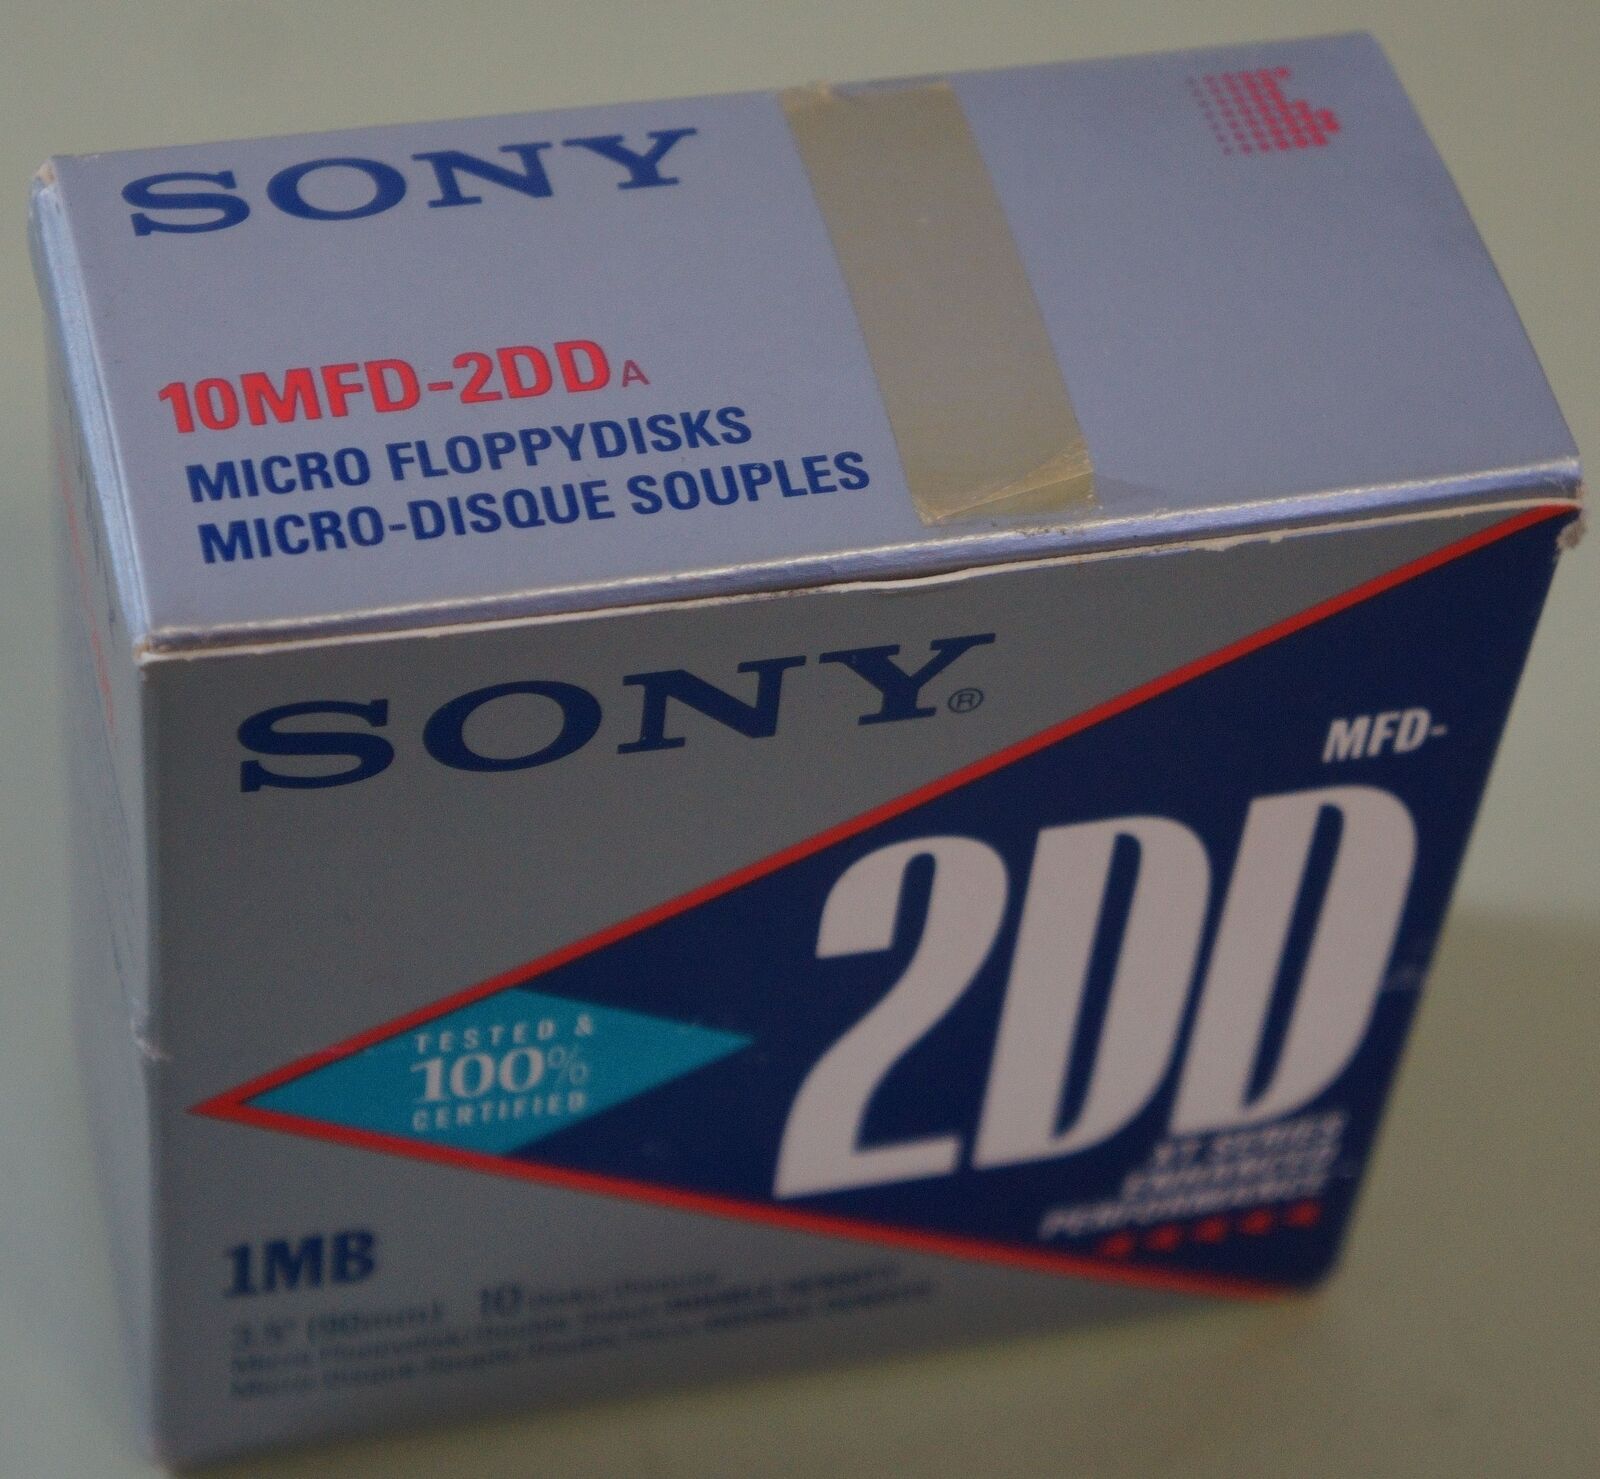 Sony Pack of 10 MFD-2DD Micro Floppy Disks Double Sided / Double Density - NOS